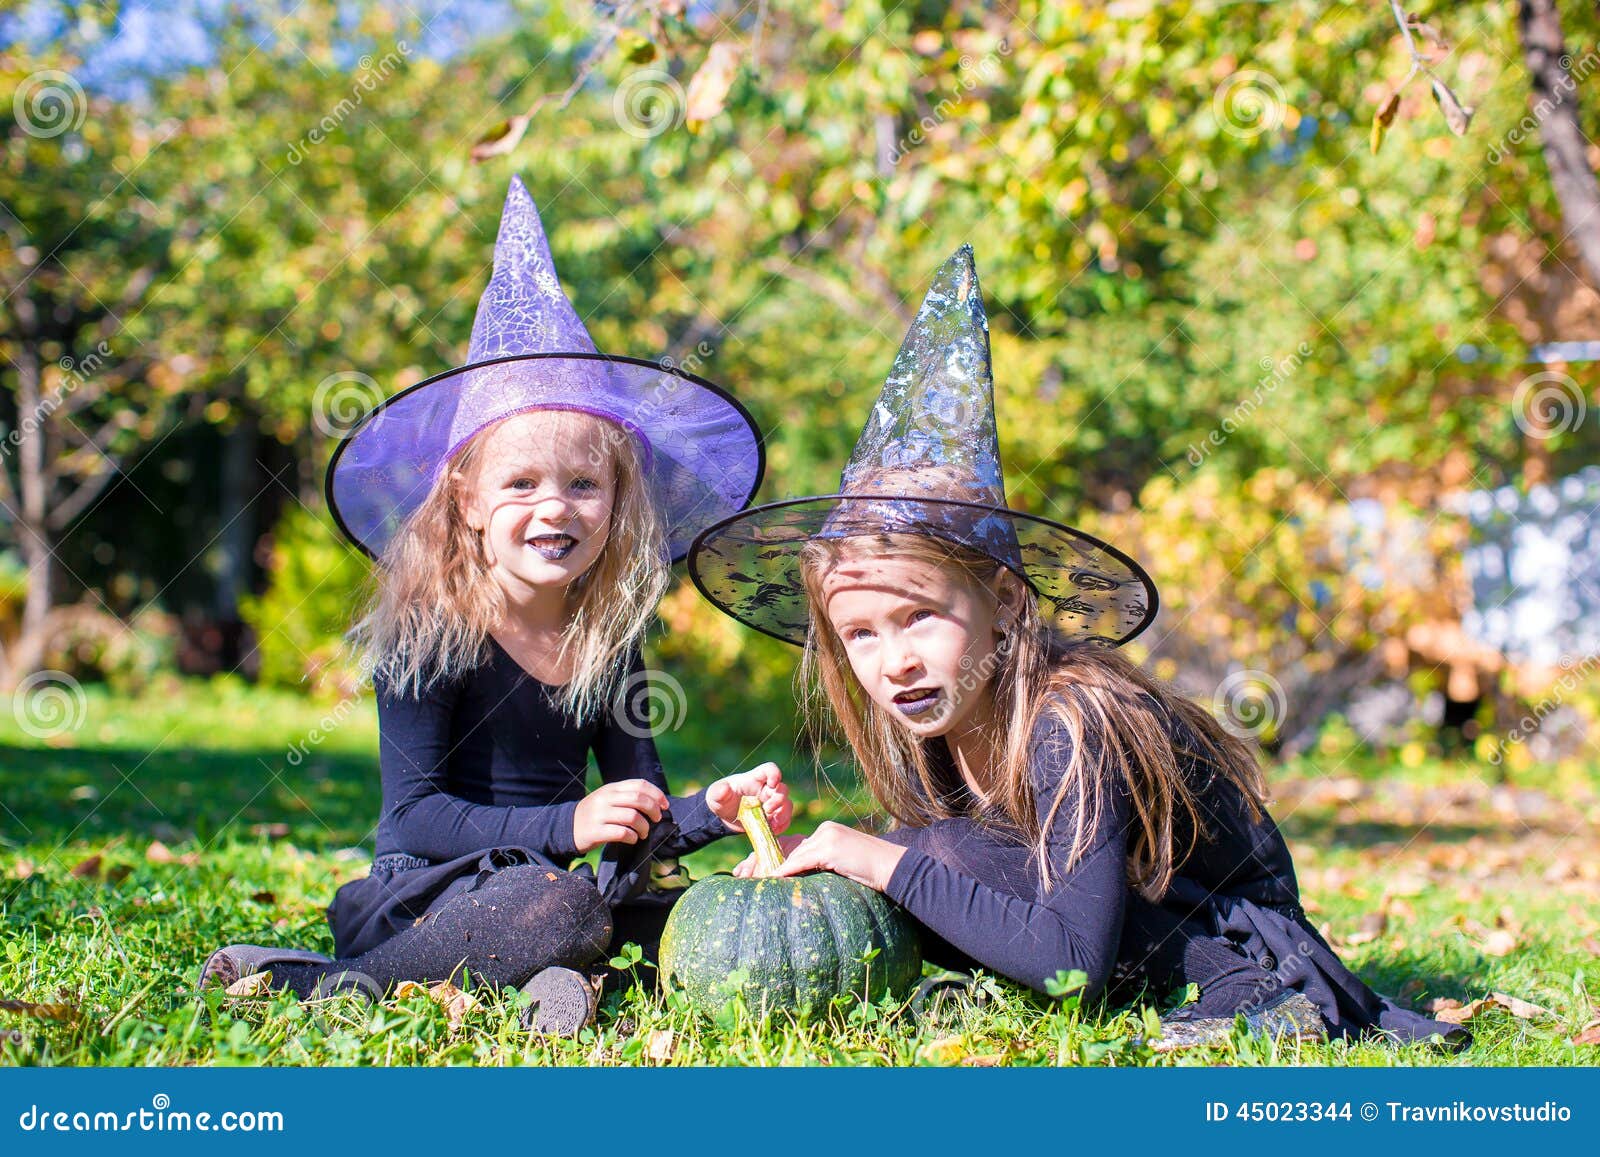 Adorable Little Girls in Witch Costume Casting a Stock Photo - Image of ...